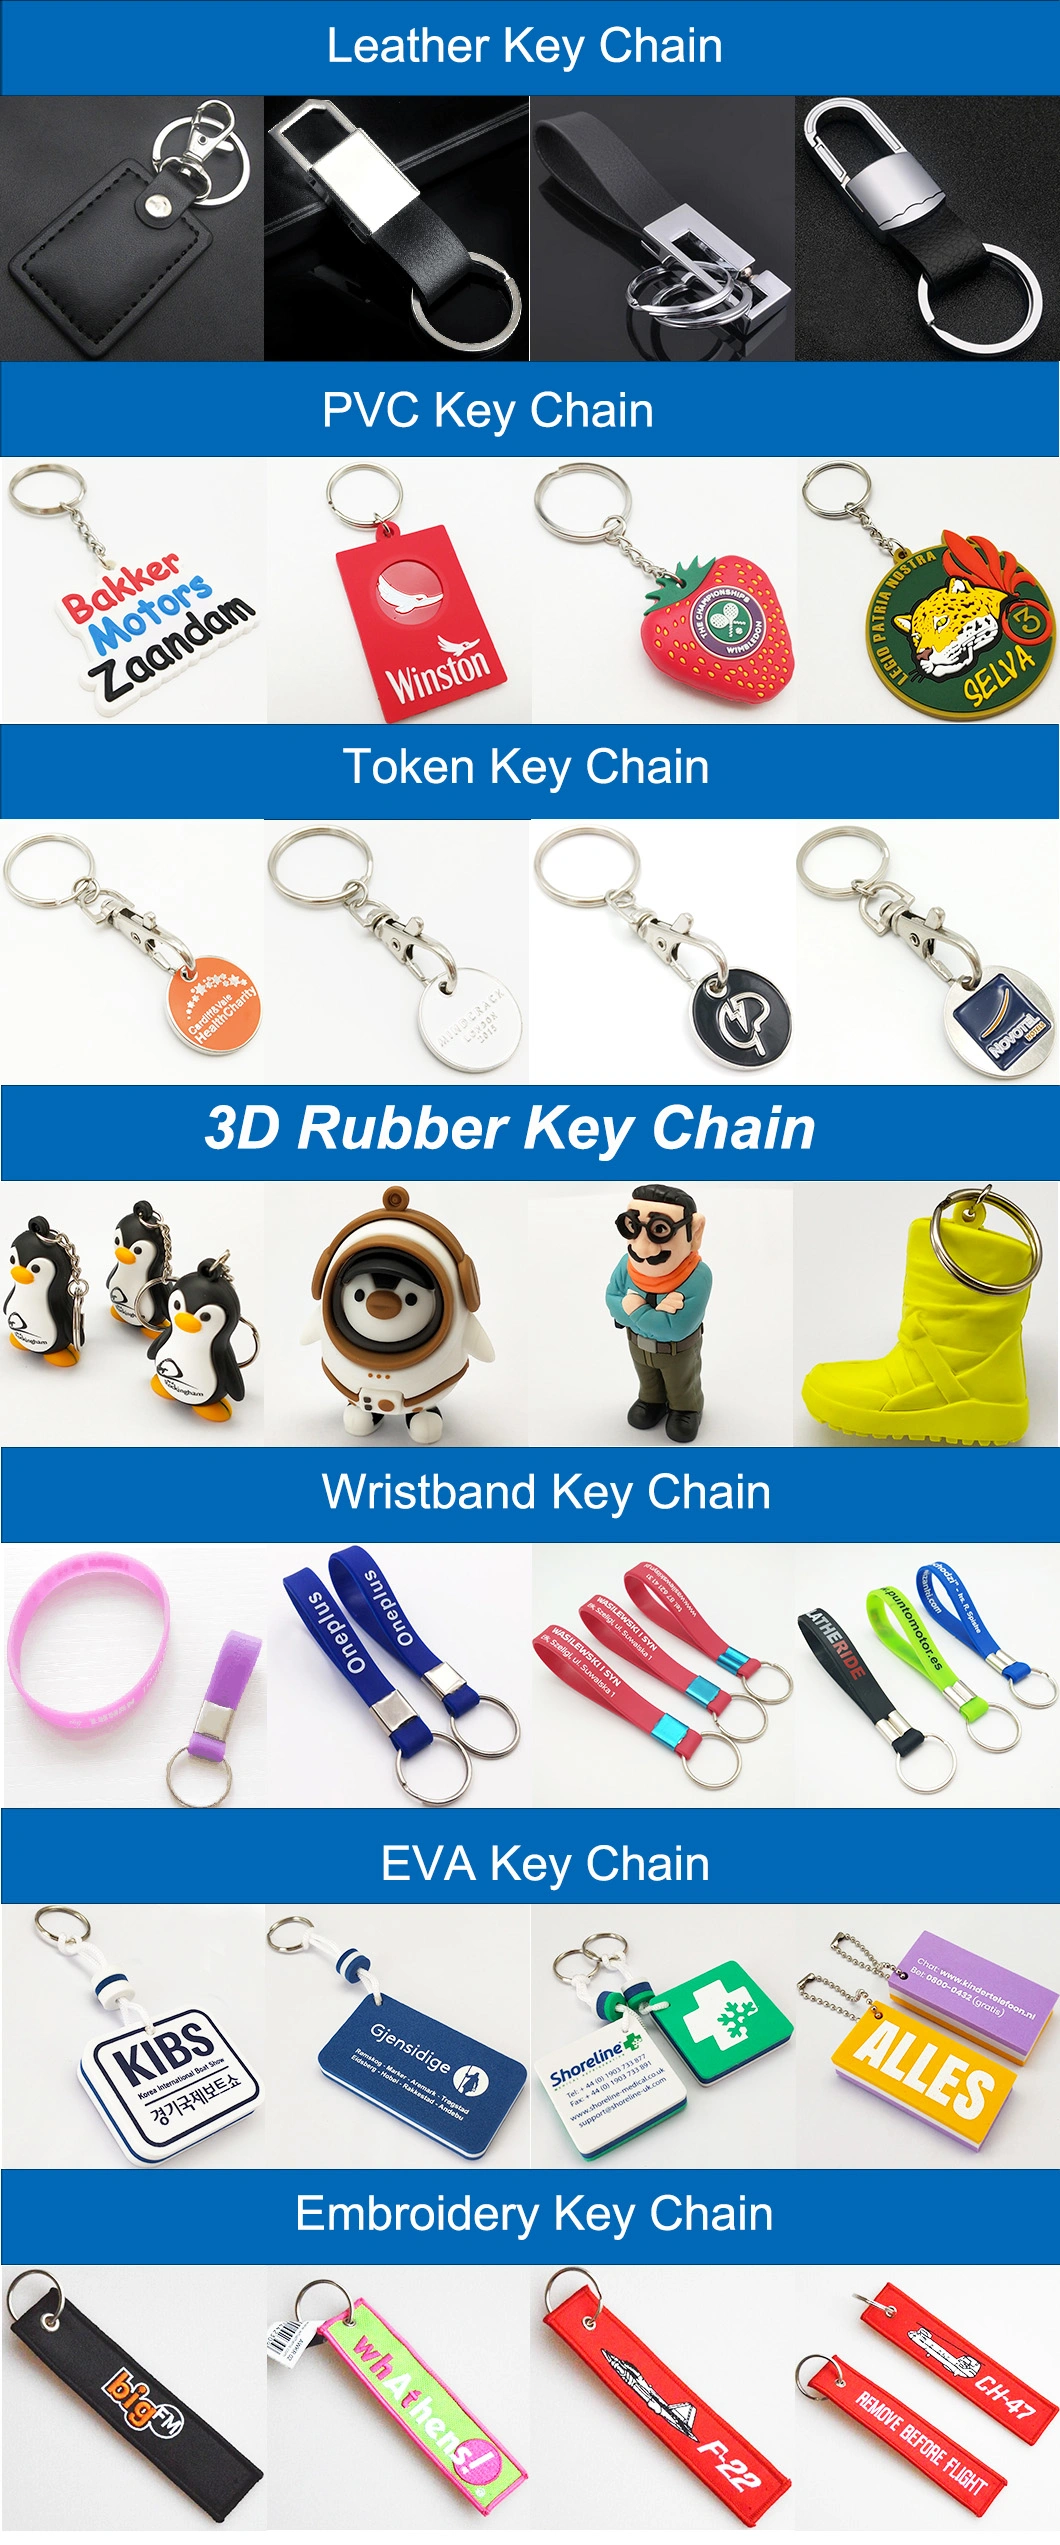 Wholesale Personalized Customized Stamping Craft Key Ring Promotional Items Souvenir Embossed Name Decoration Accessories Keychains (KC17)